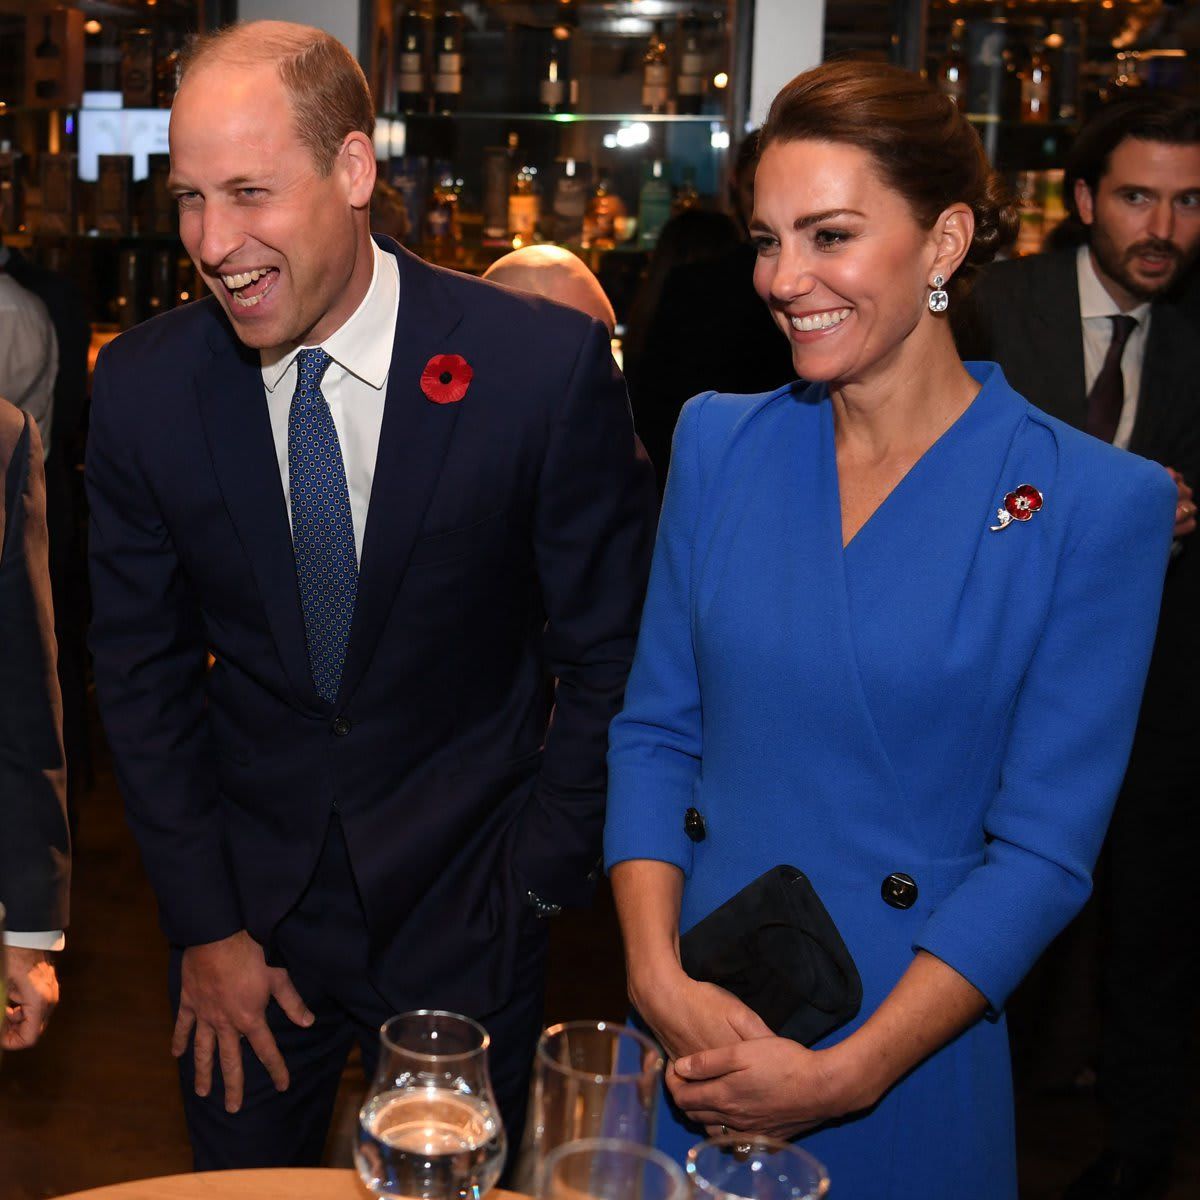 The Duke and Duchess of Cambridge traveled to Scotland for the COP26 summit